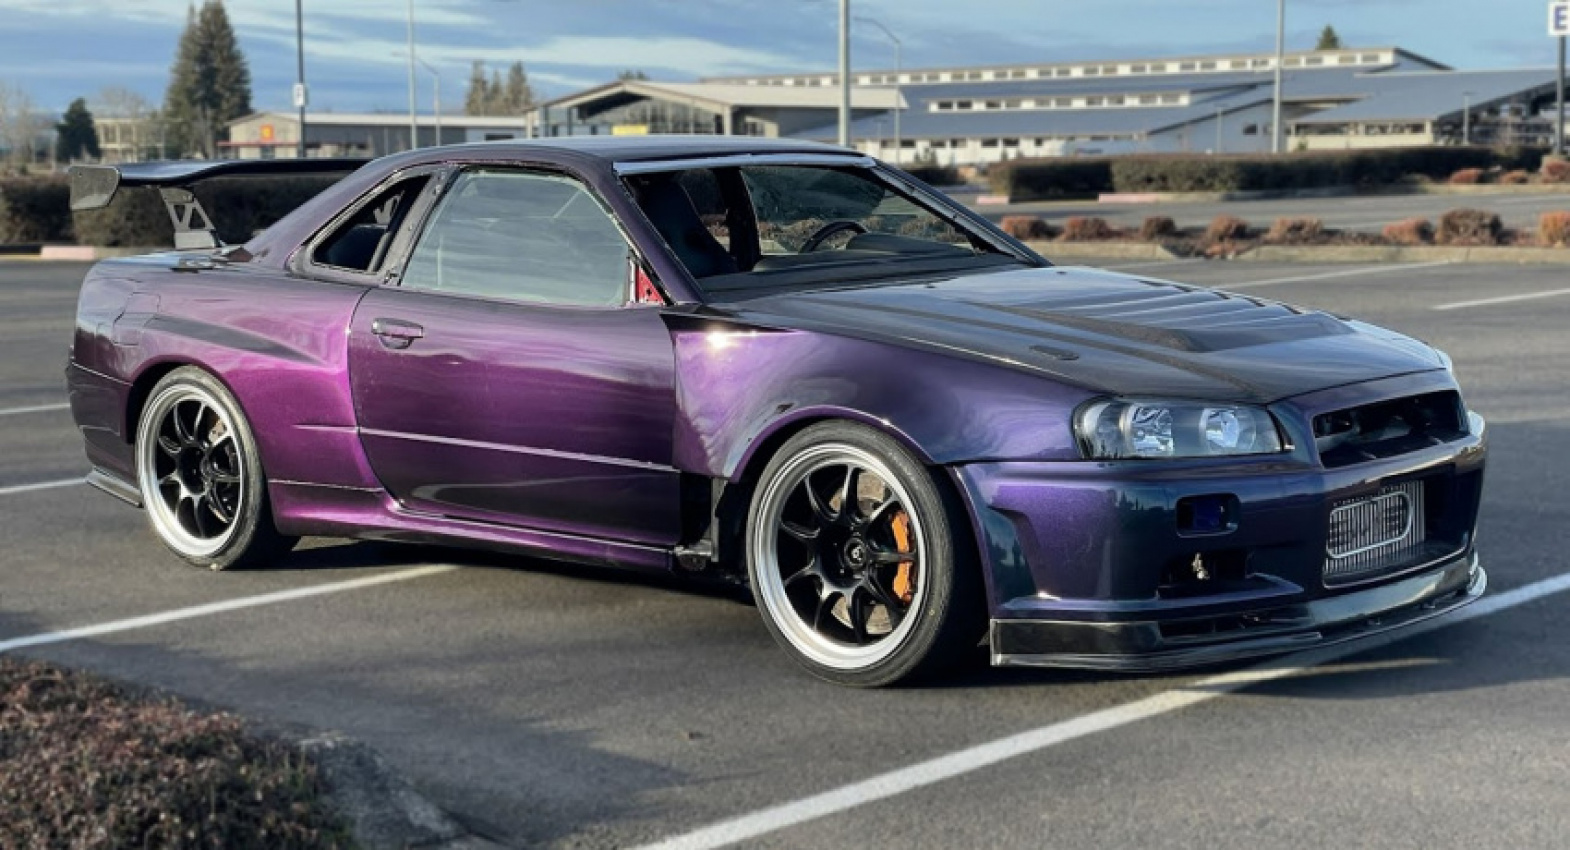 autos, cars, news, nissan, nissan gt-r, nissan skyline, nissan videos, tuning, this guy dropped an r34 nissan skyline body on a salvaged r35 and this is its first test drive